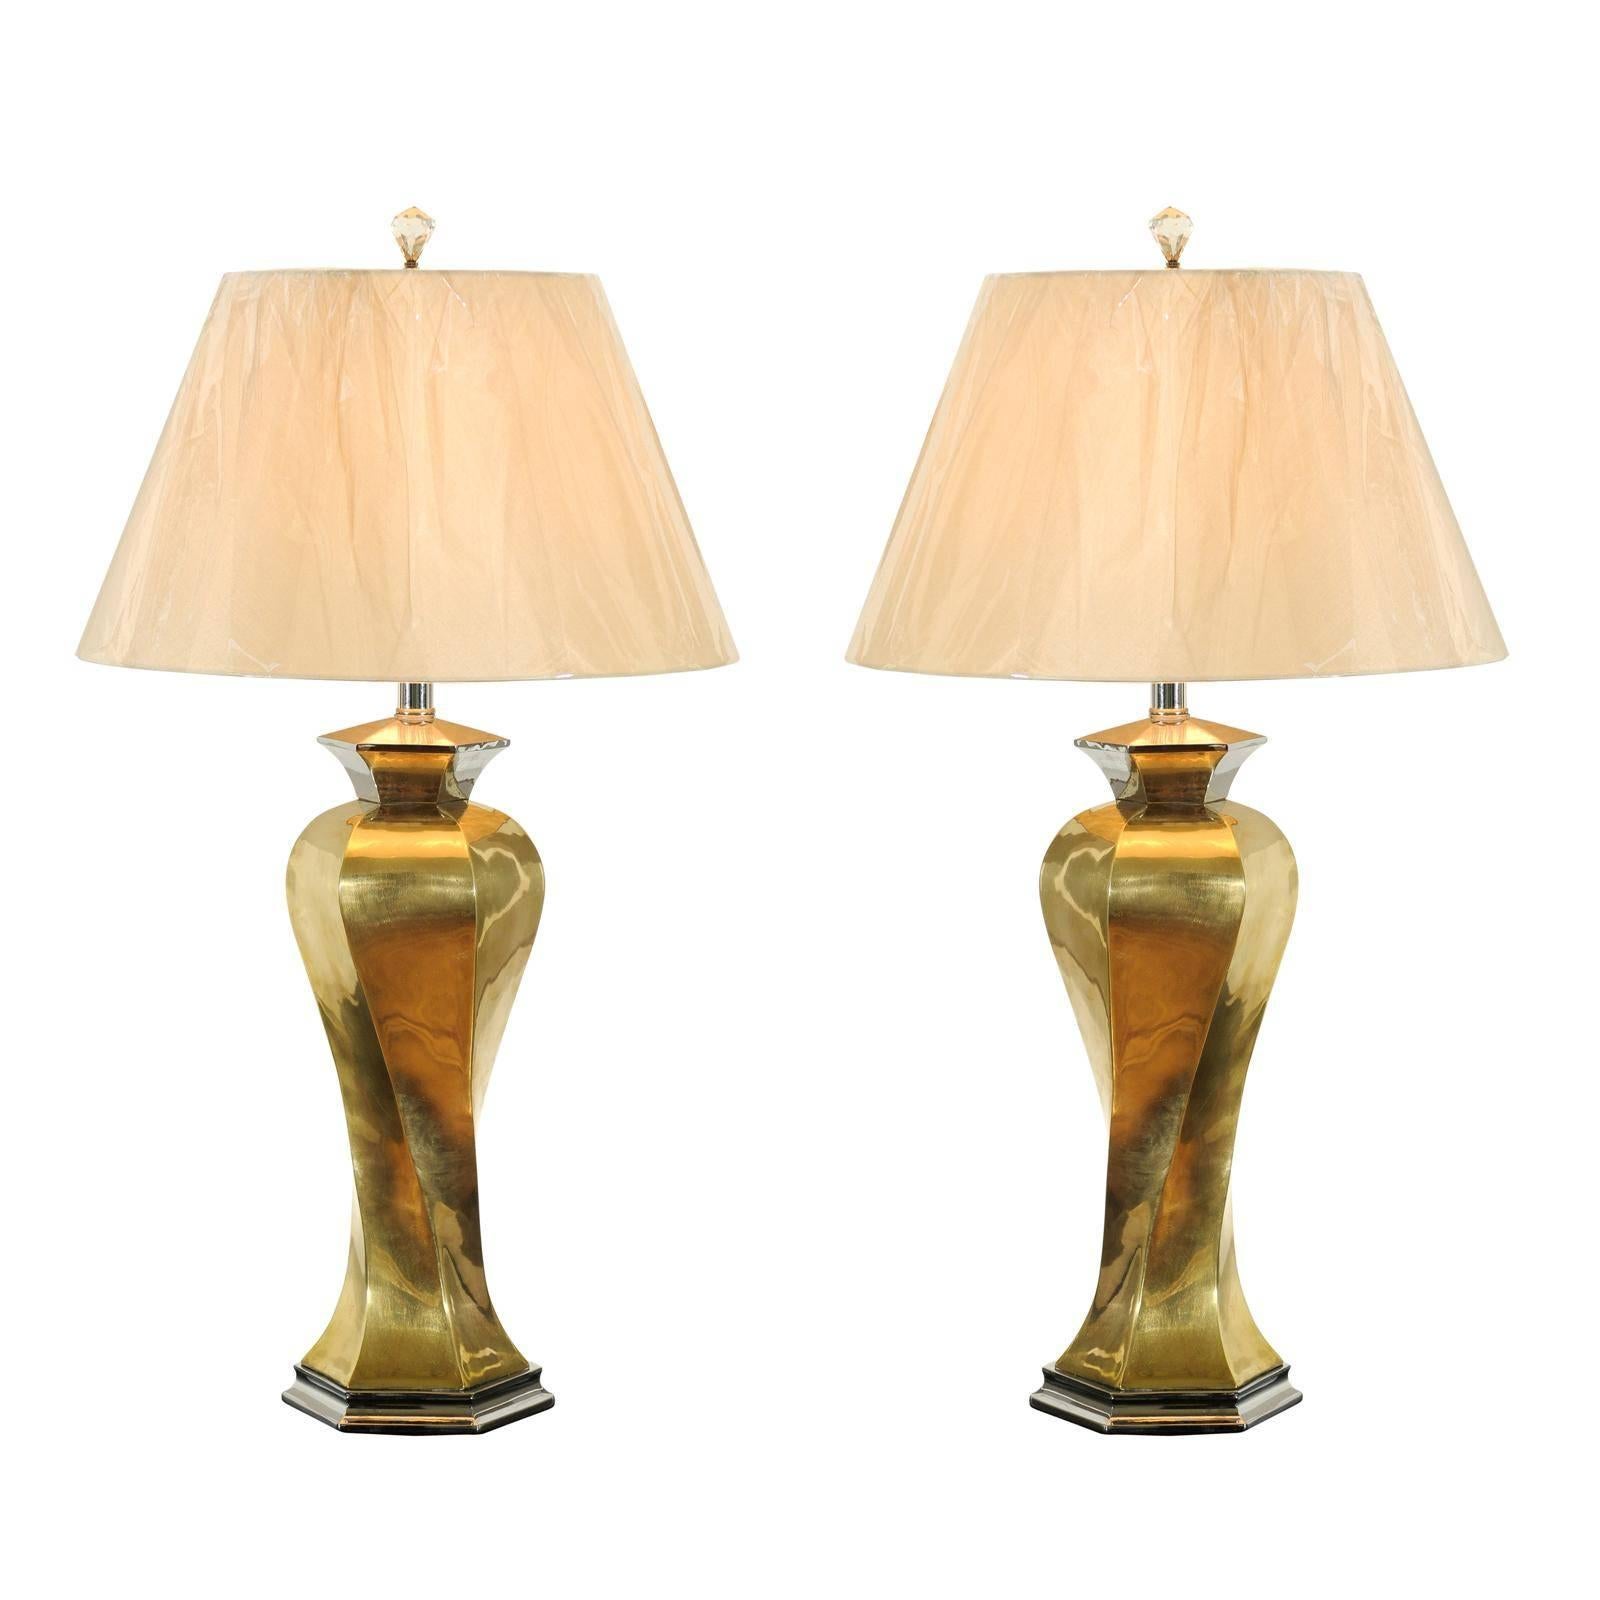 Sculptural Pair of Twisted Modern Lamps in Brass and Nickel